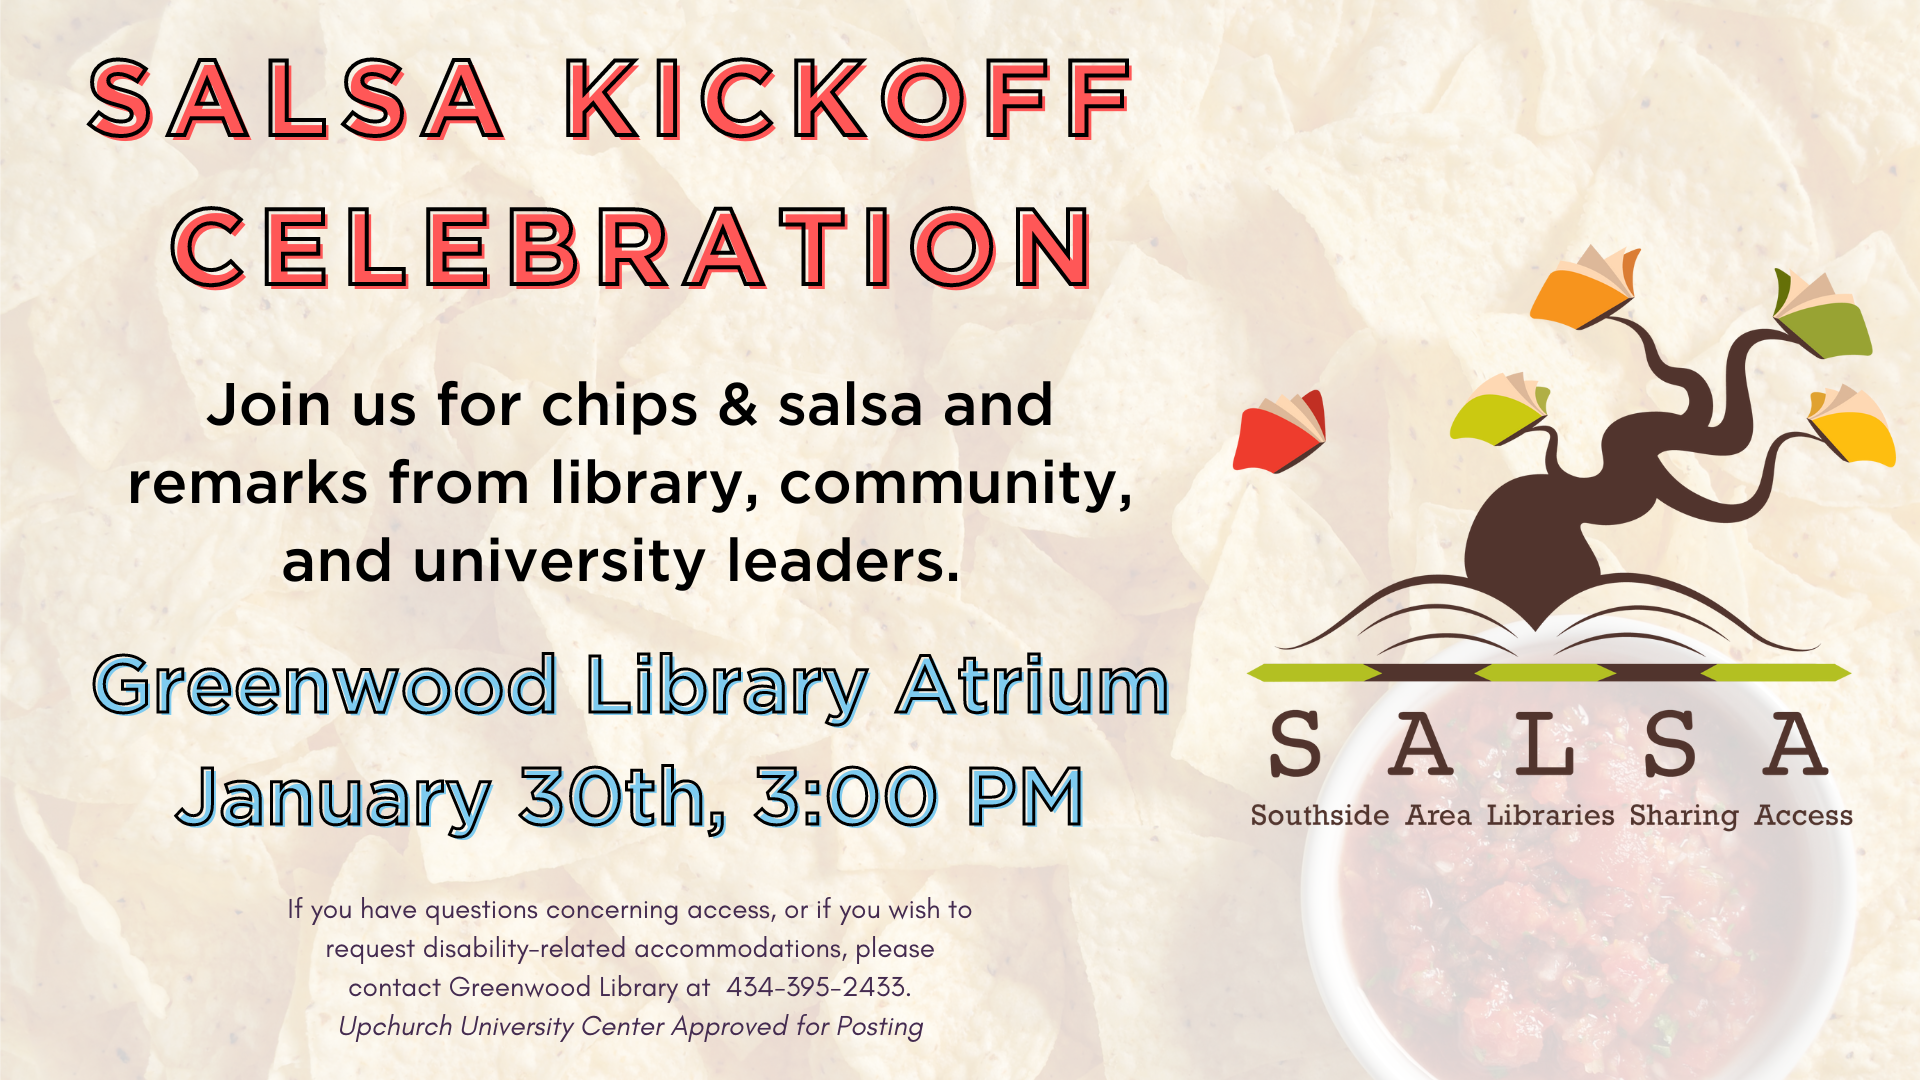 Image of chips and salsa announcing the Kickoff Celebration event